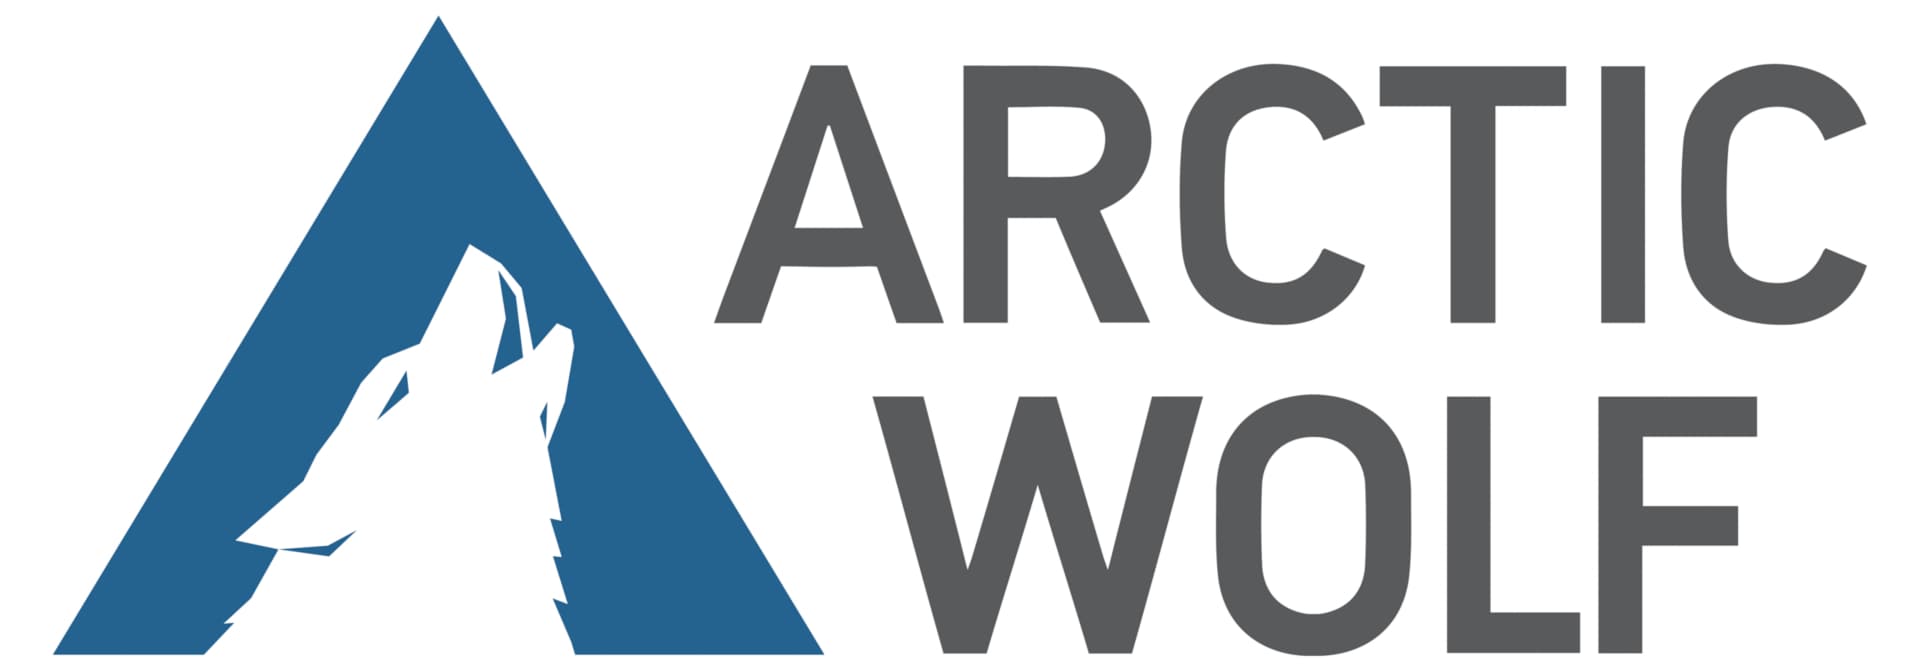 Arctic Wolf Managed Detection and Response - subscription license (2 years)